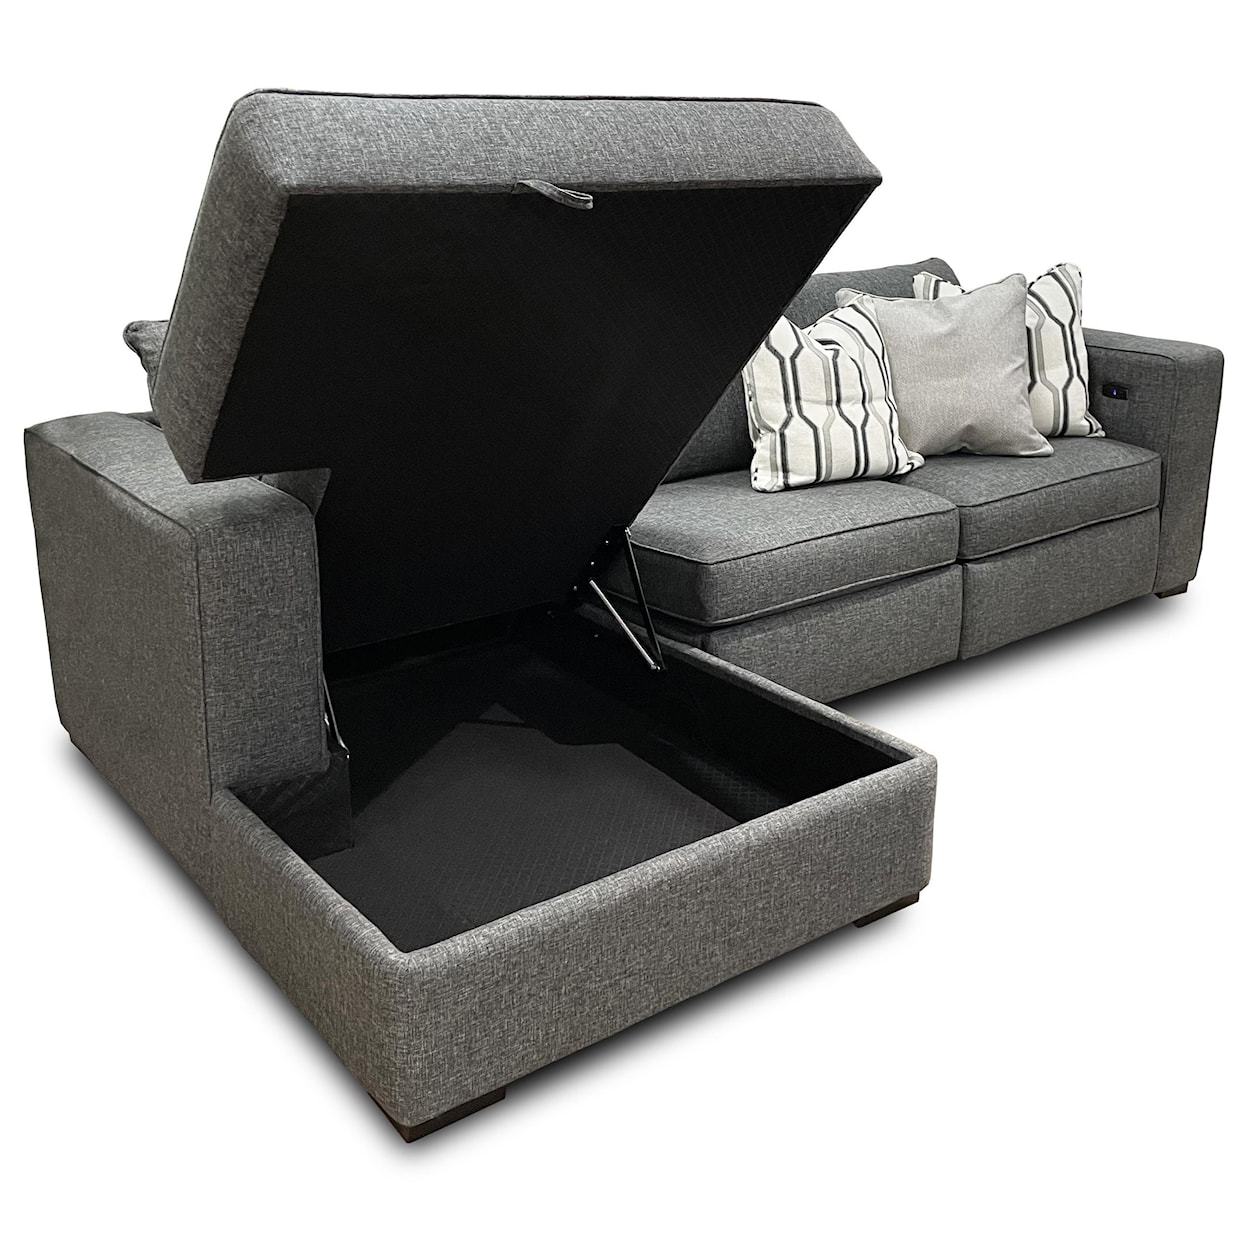 Decor-Rest Madelyn Sectional with Storage Chaise